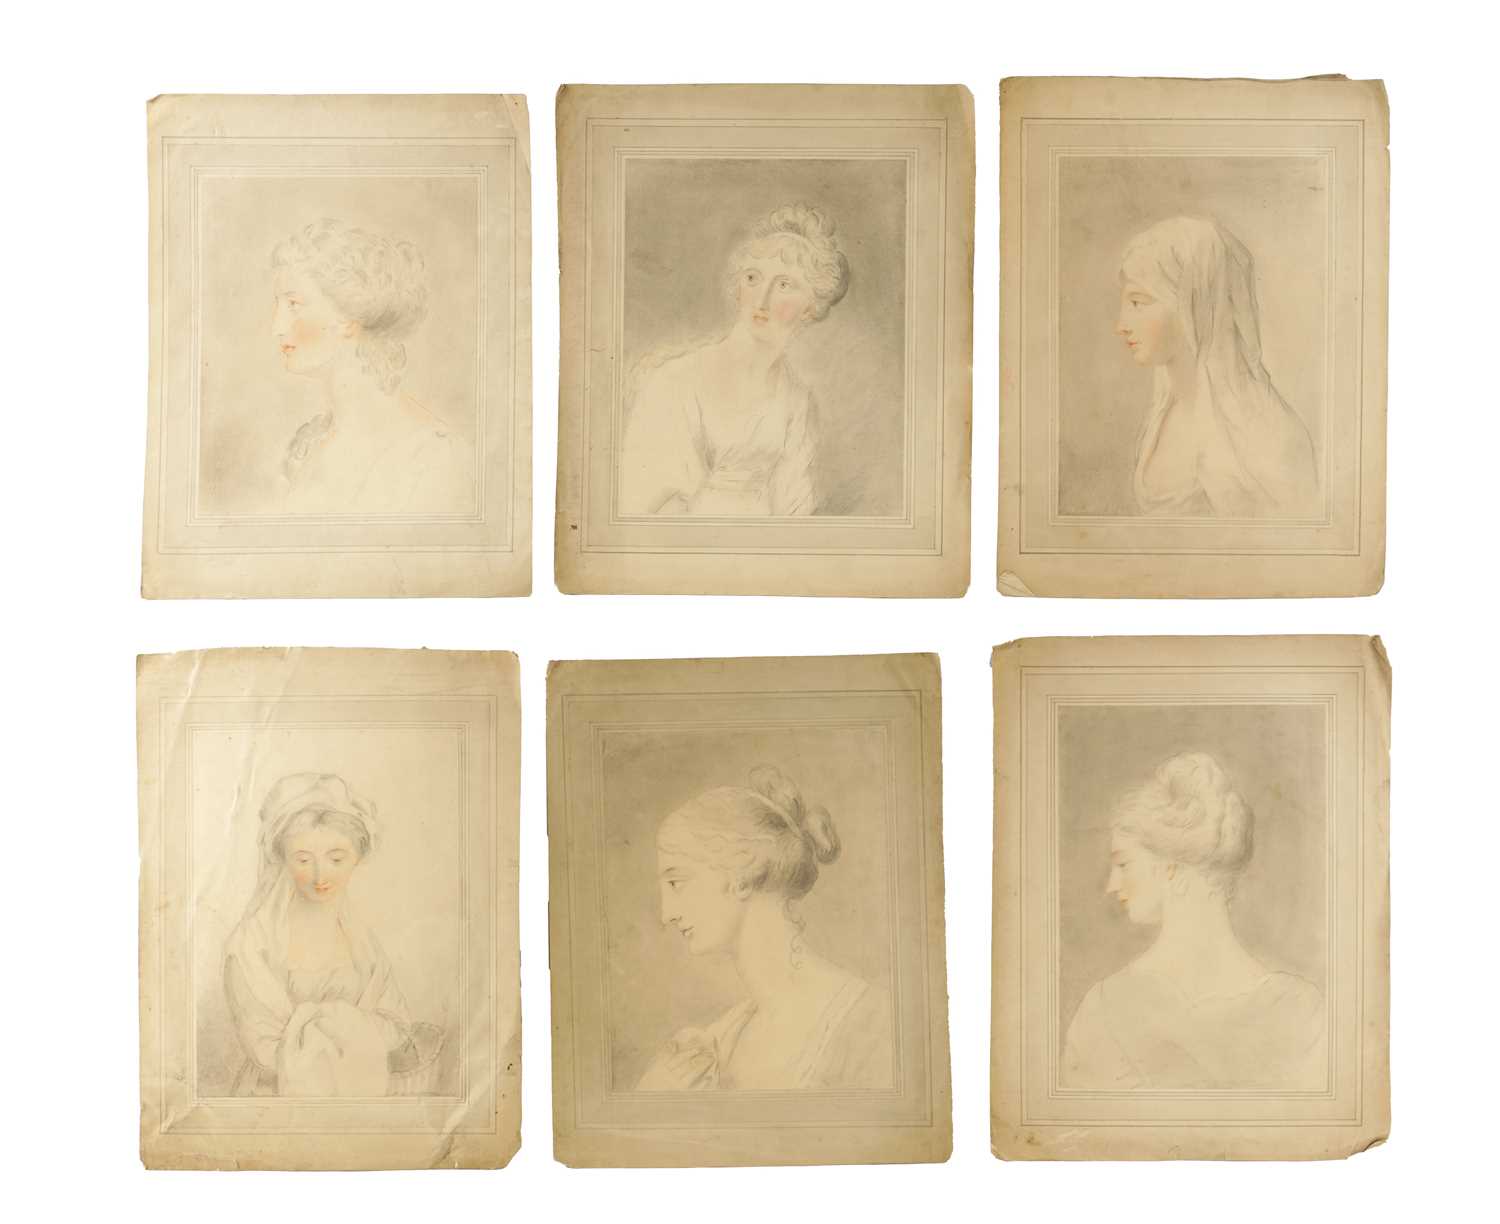 A COLLECTION OF SIX 19TH CENTURY PORTRAIT DRAWINGS OF LADIES